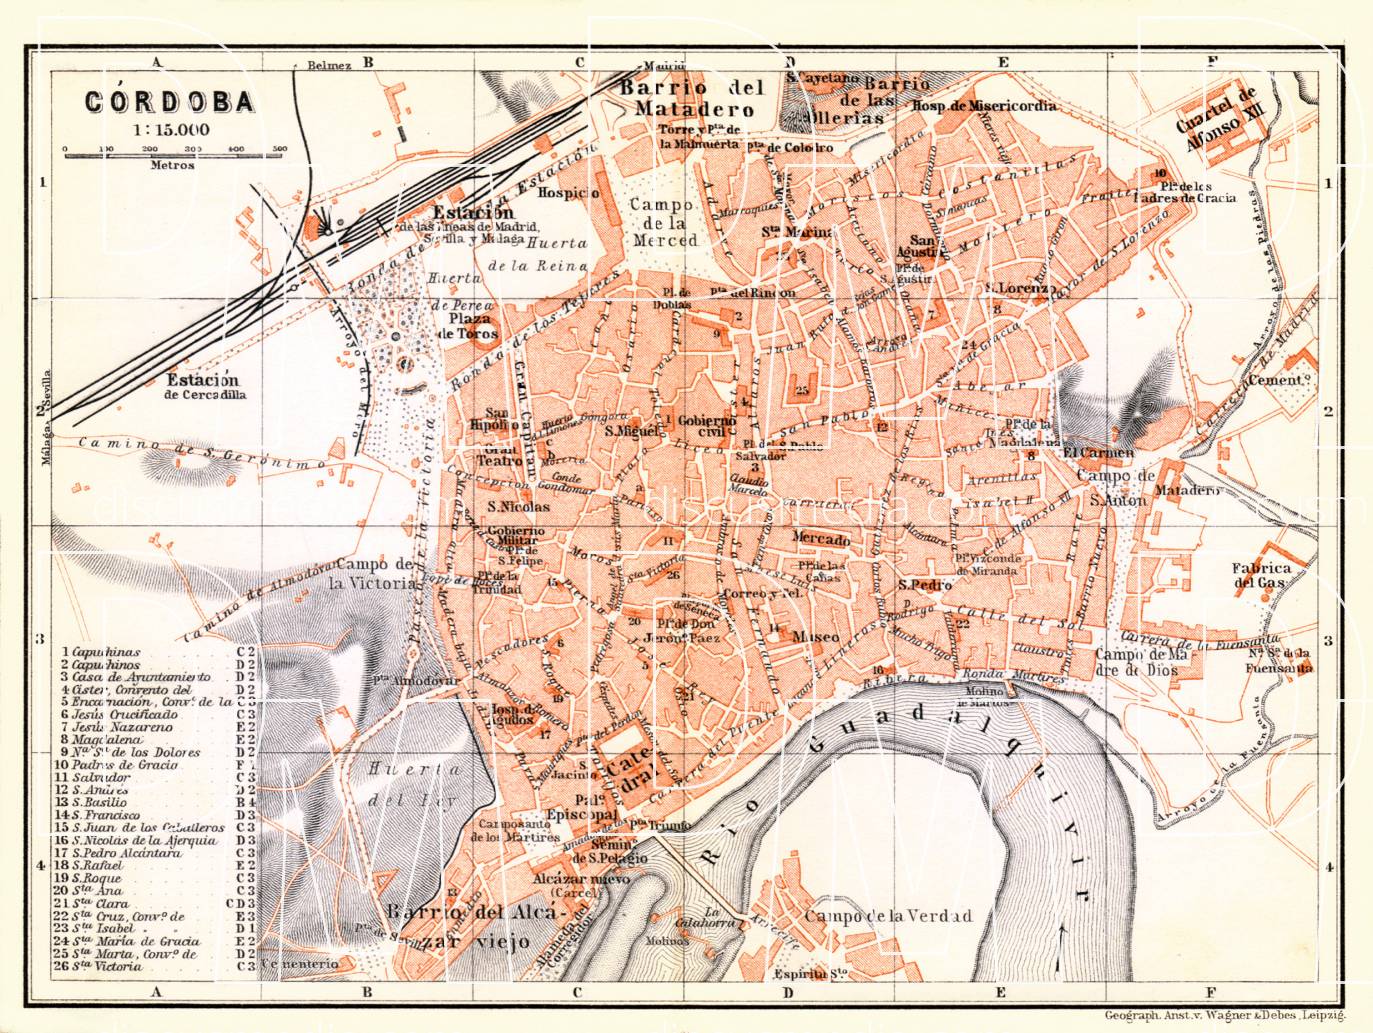 Old map of Córdoba in 1899. Buy vintage map replica poster print or ...